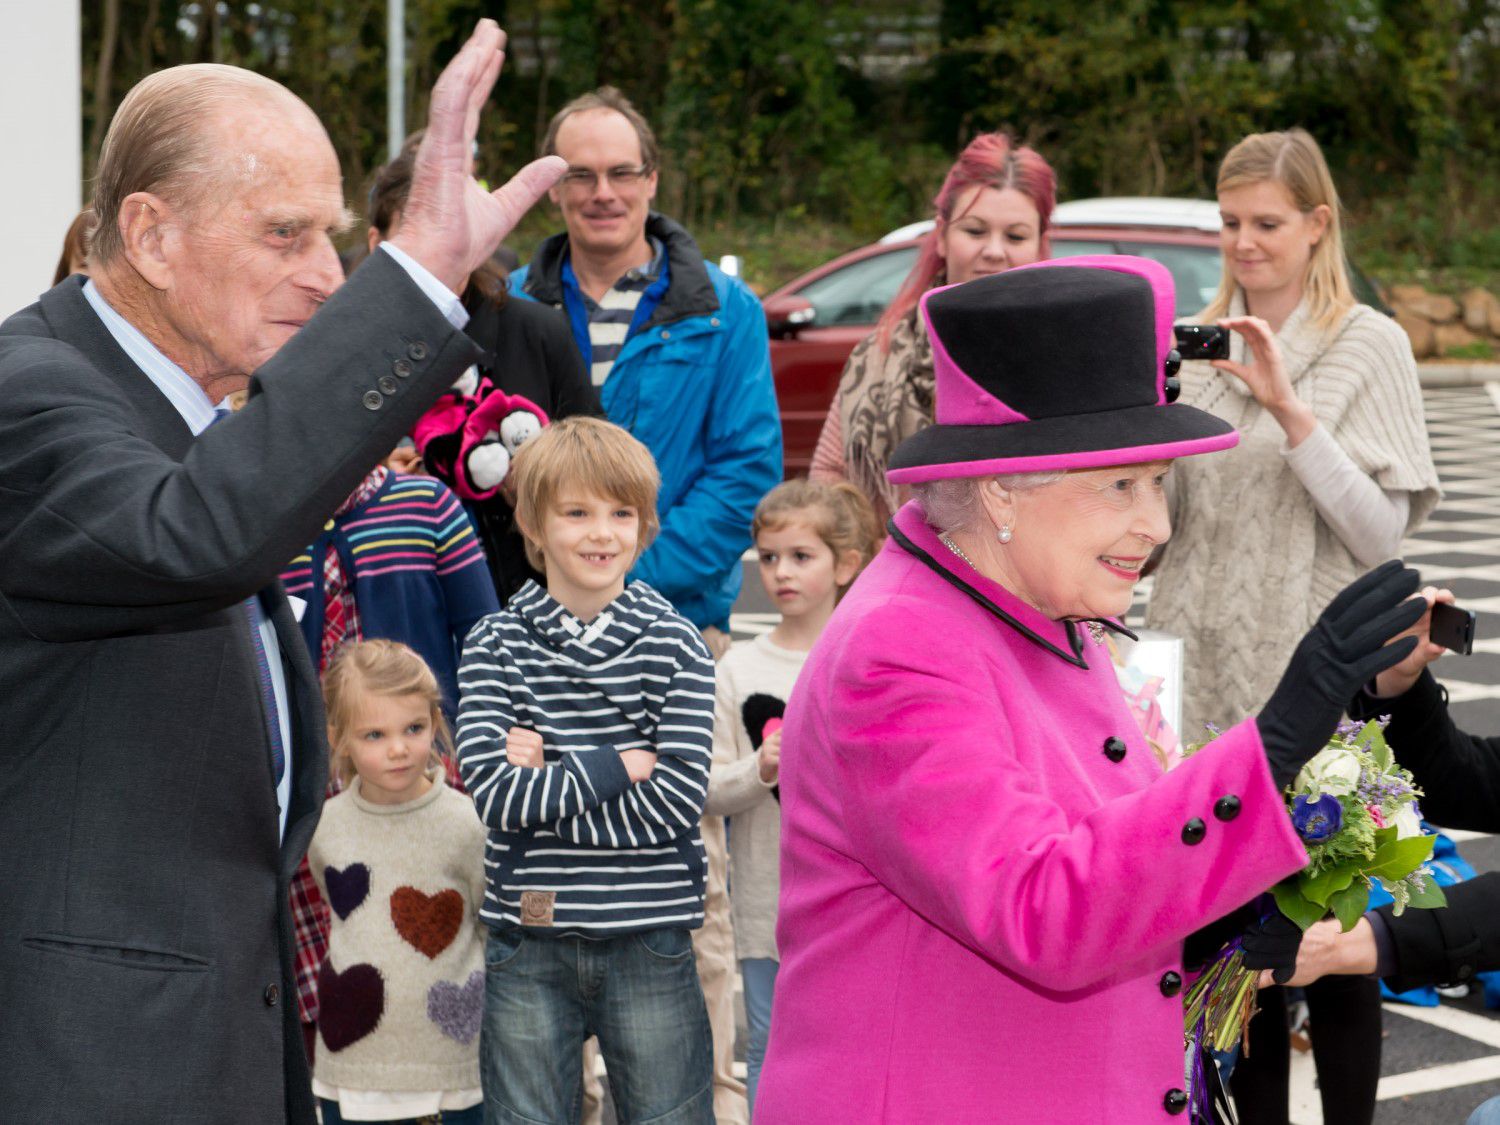 Prince Philip, Duke of Edinburgh, and Her Majesty the Queen arriving at The Keep on 31 October 2013 to officially open the building